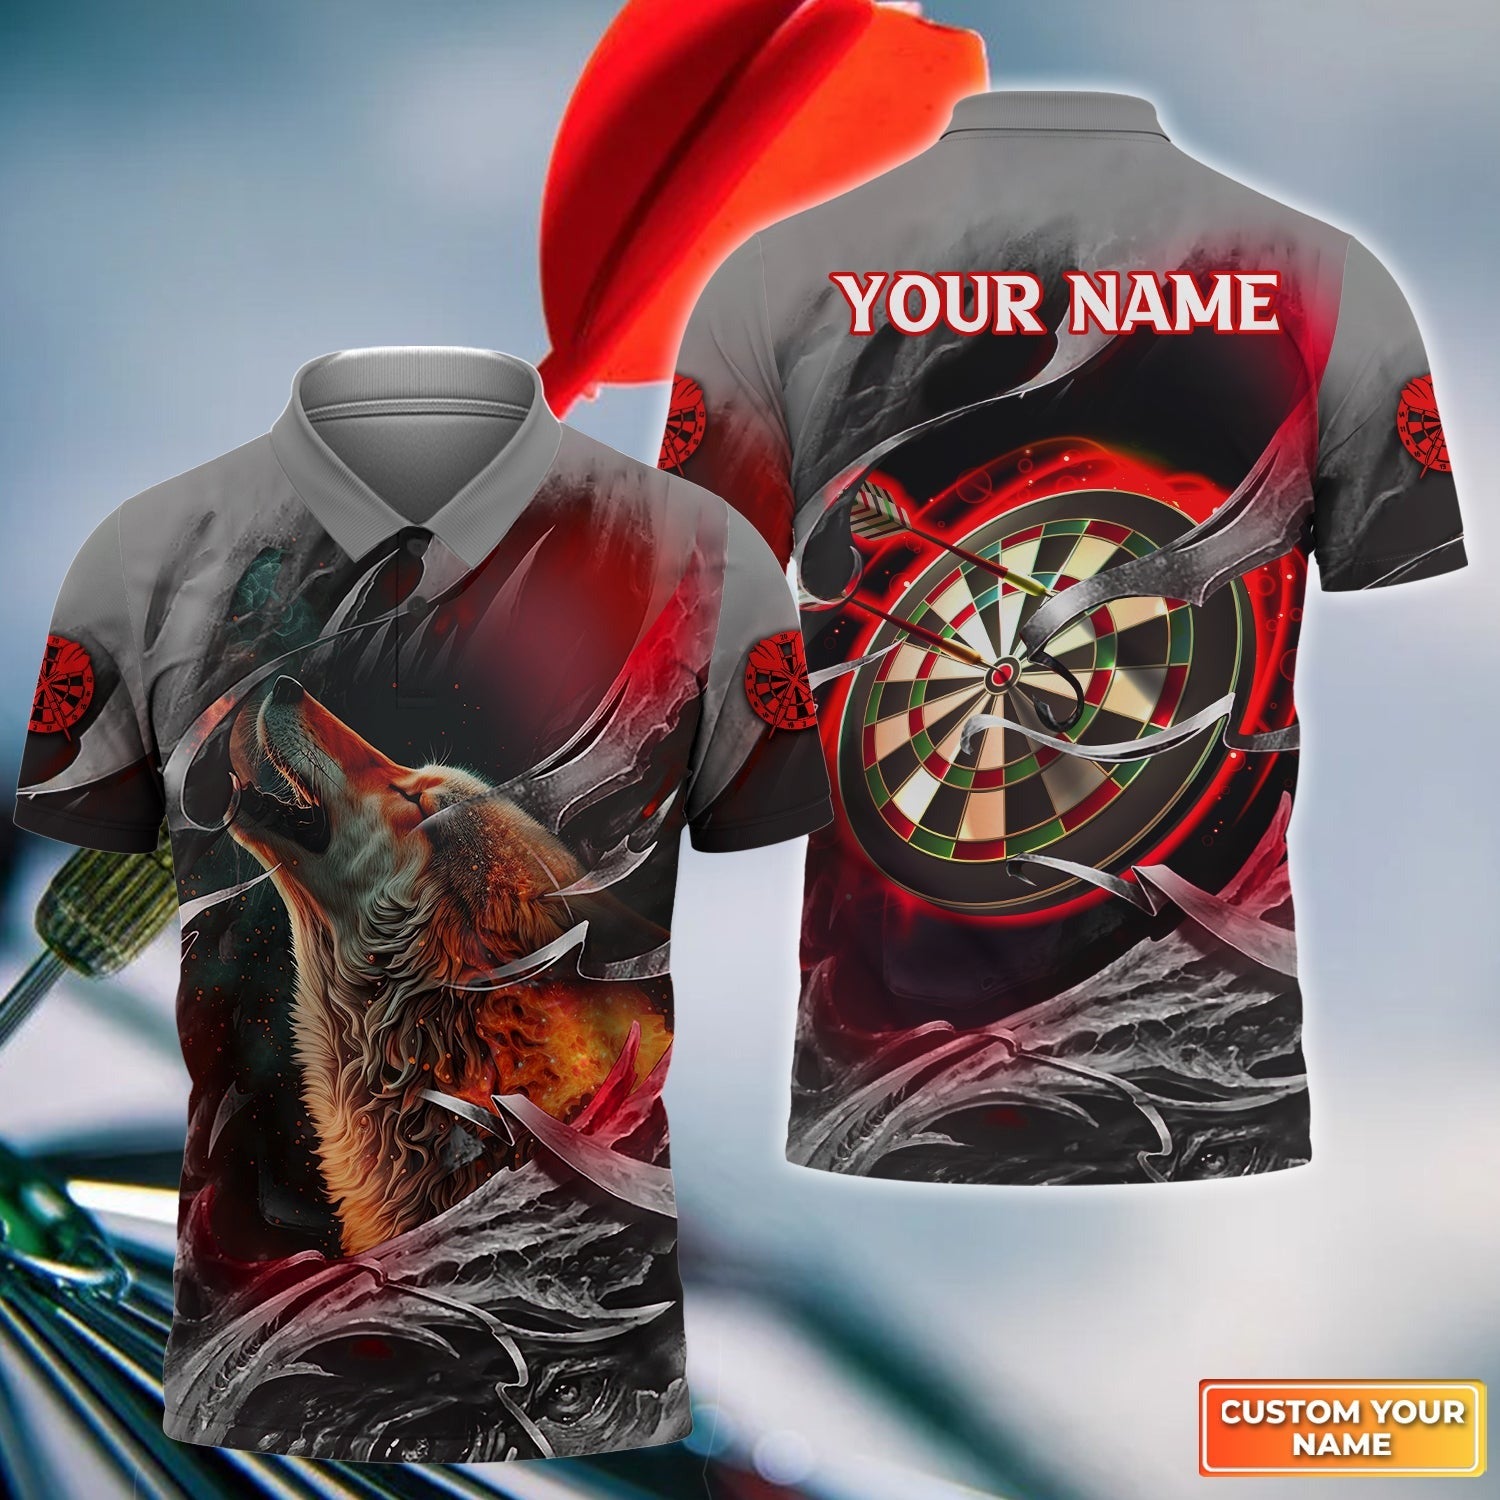 Customized Name Darts Men Polo Shirt, Bullseye Dartboard Personalized Flame Wolf And Darts Polo Shirt - Gift For Darts Players, Darts Lovers